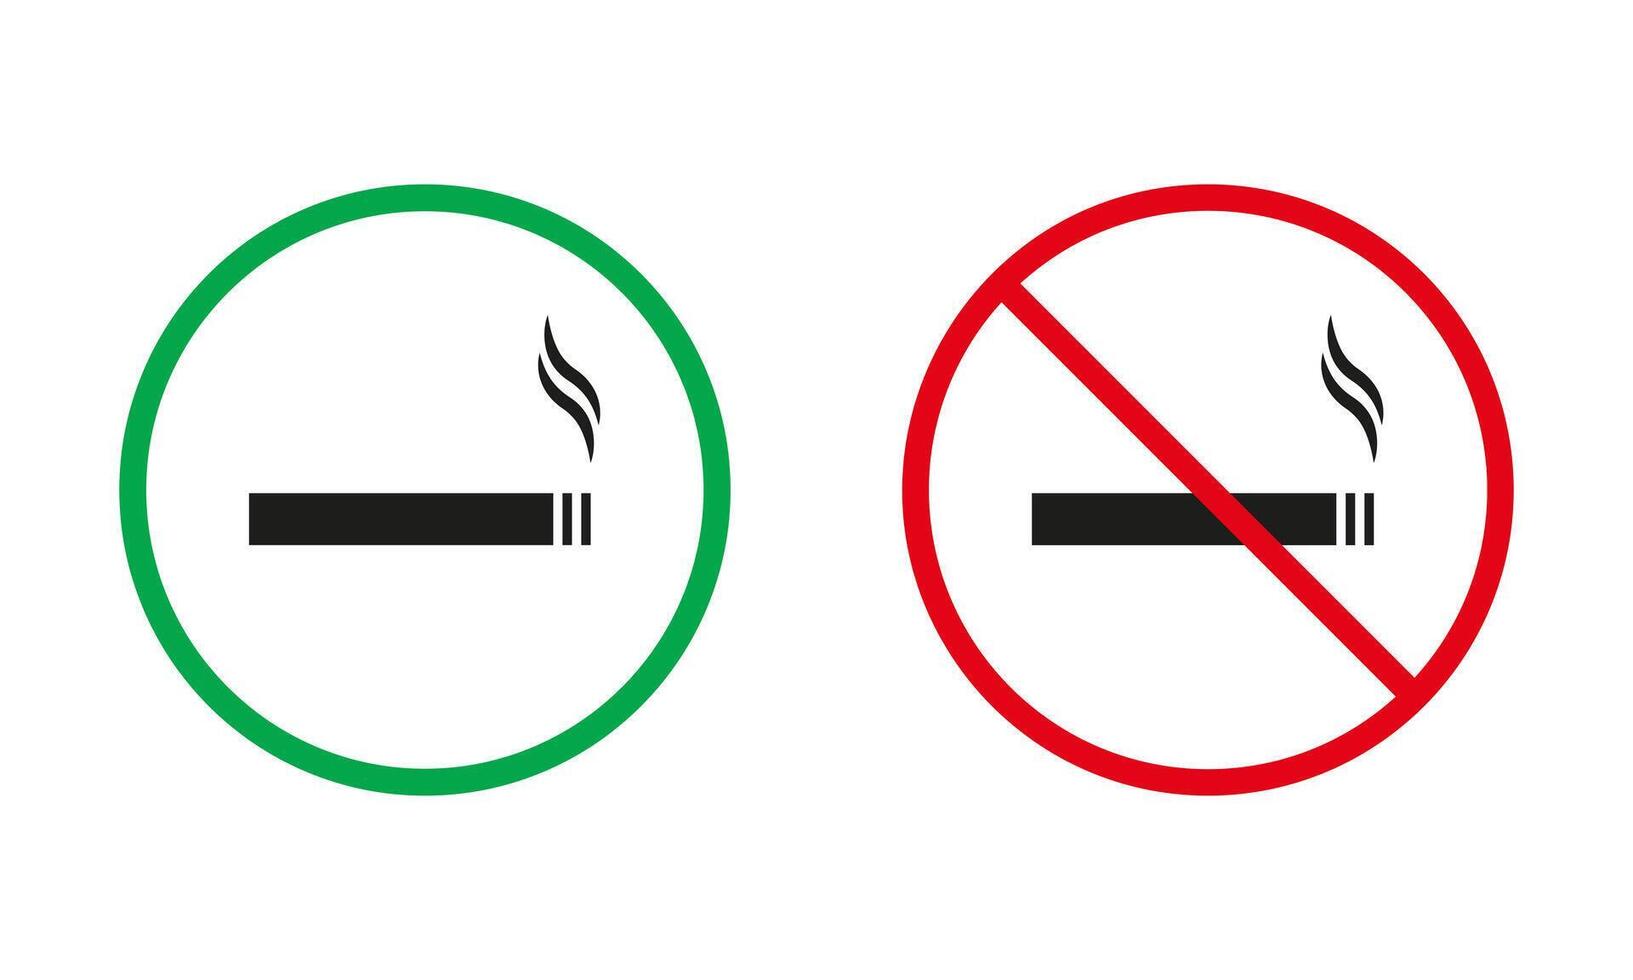 Smoking Red and Green Warning Signs. Smoke Cigarette Silhouette Icons Set. Area for Smoking Nicotine Allowed, Cigarette Prohibited Symbol. Isolated Vector Illustration